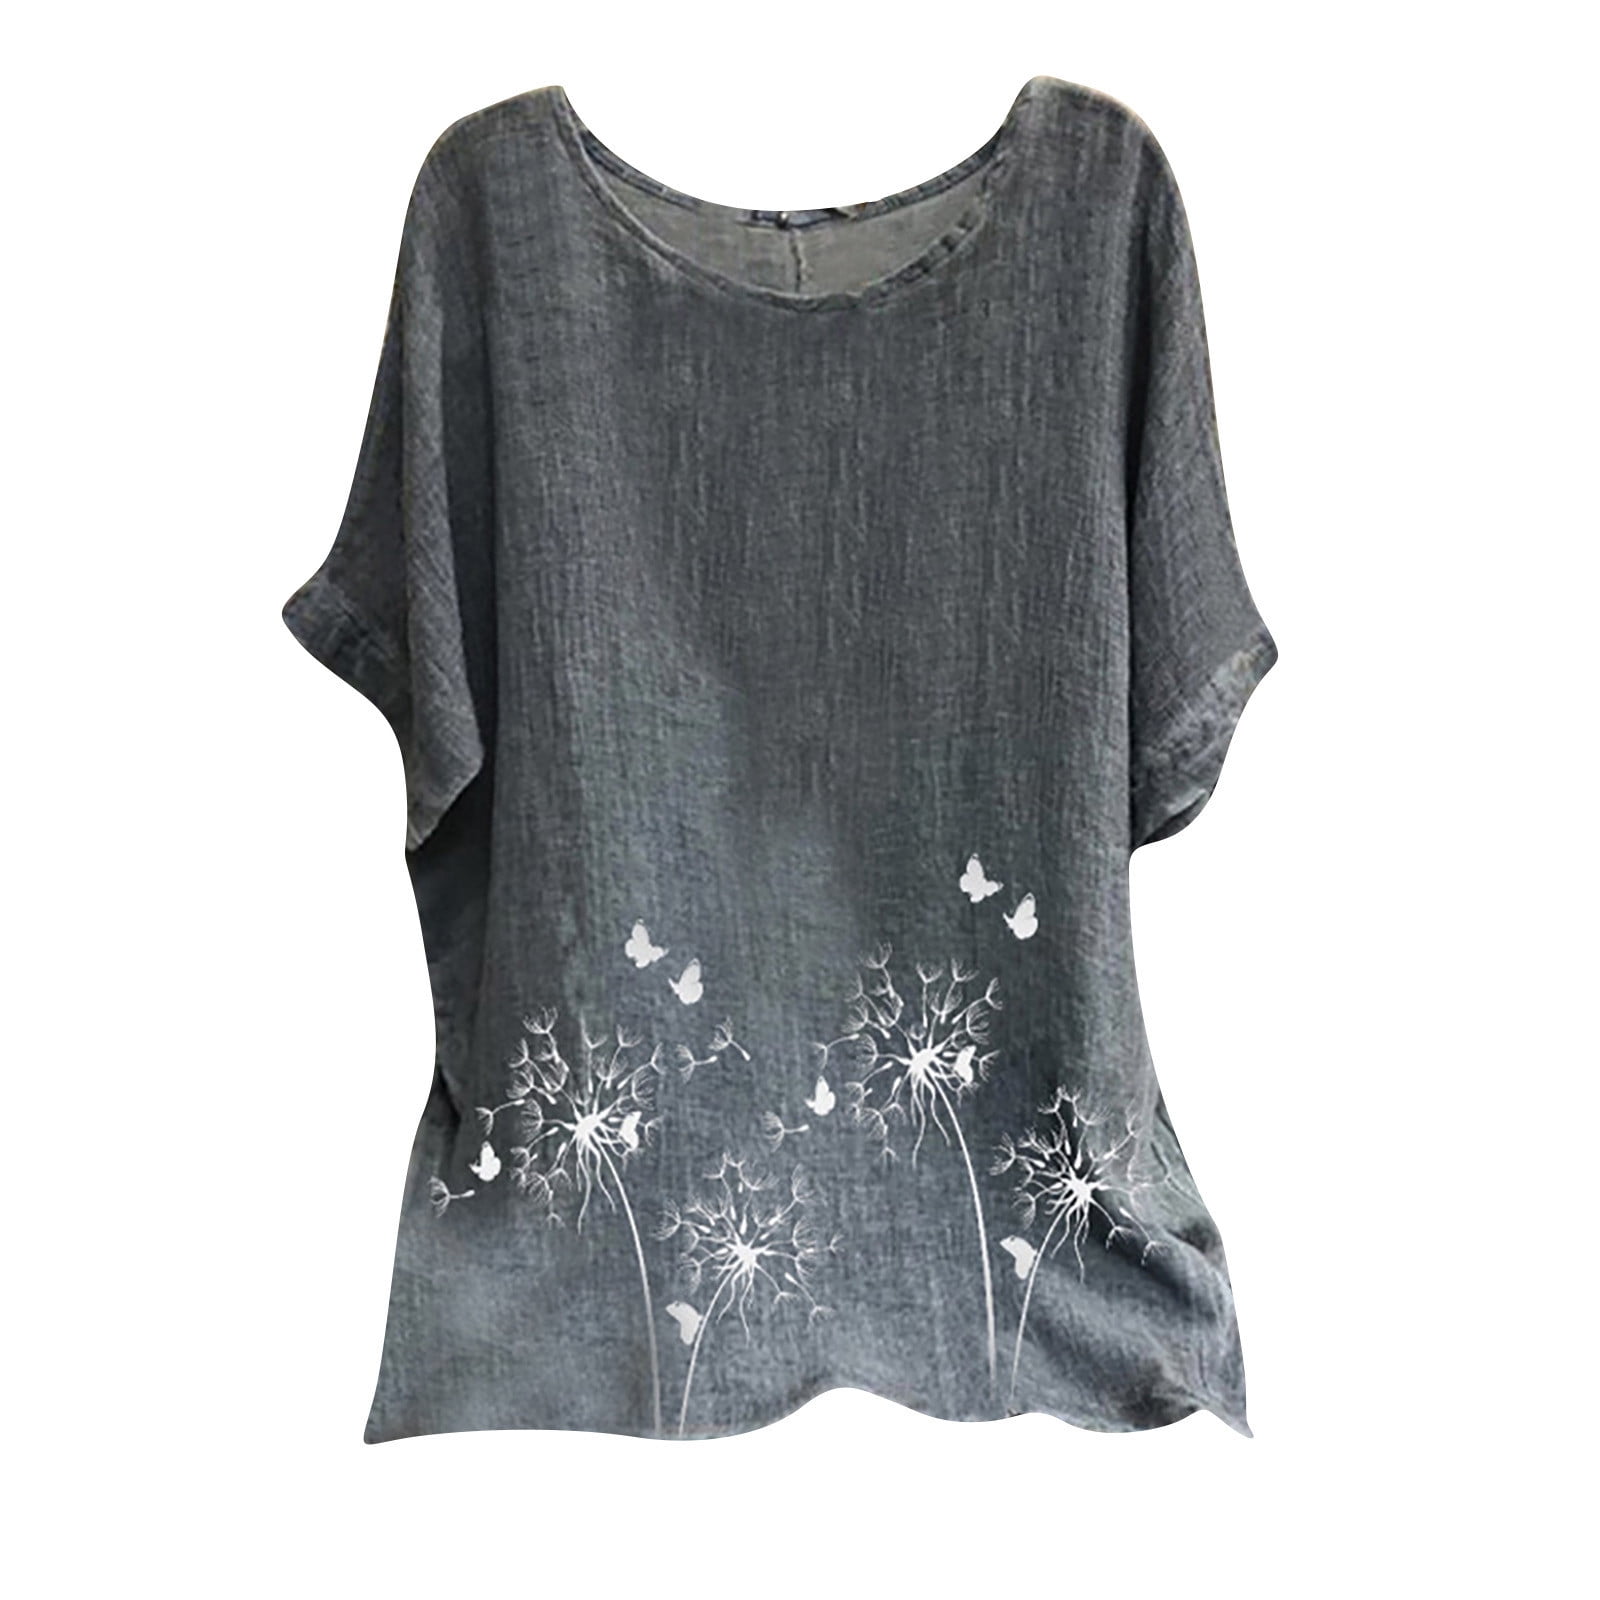 Women Summer Cute Tshirt Top Trendy Casual Loose Fit Dandelion Blouse Plus Size Short Sleeve O-Neck Workout Tunic Tees 